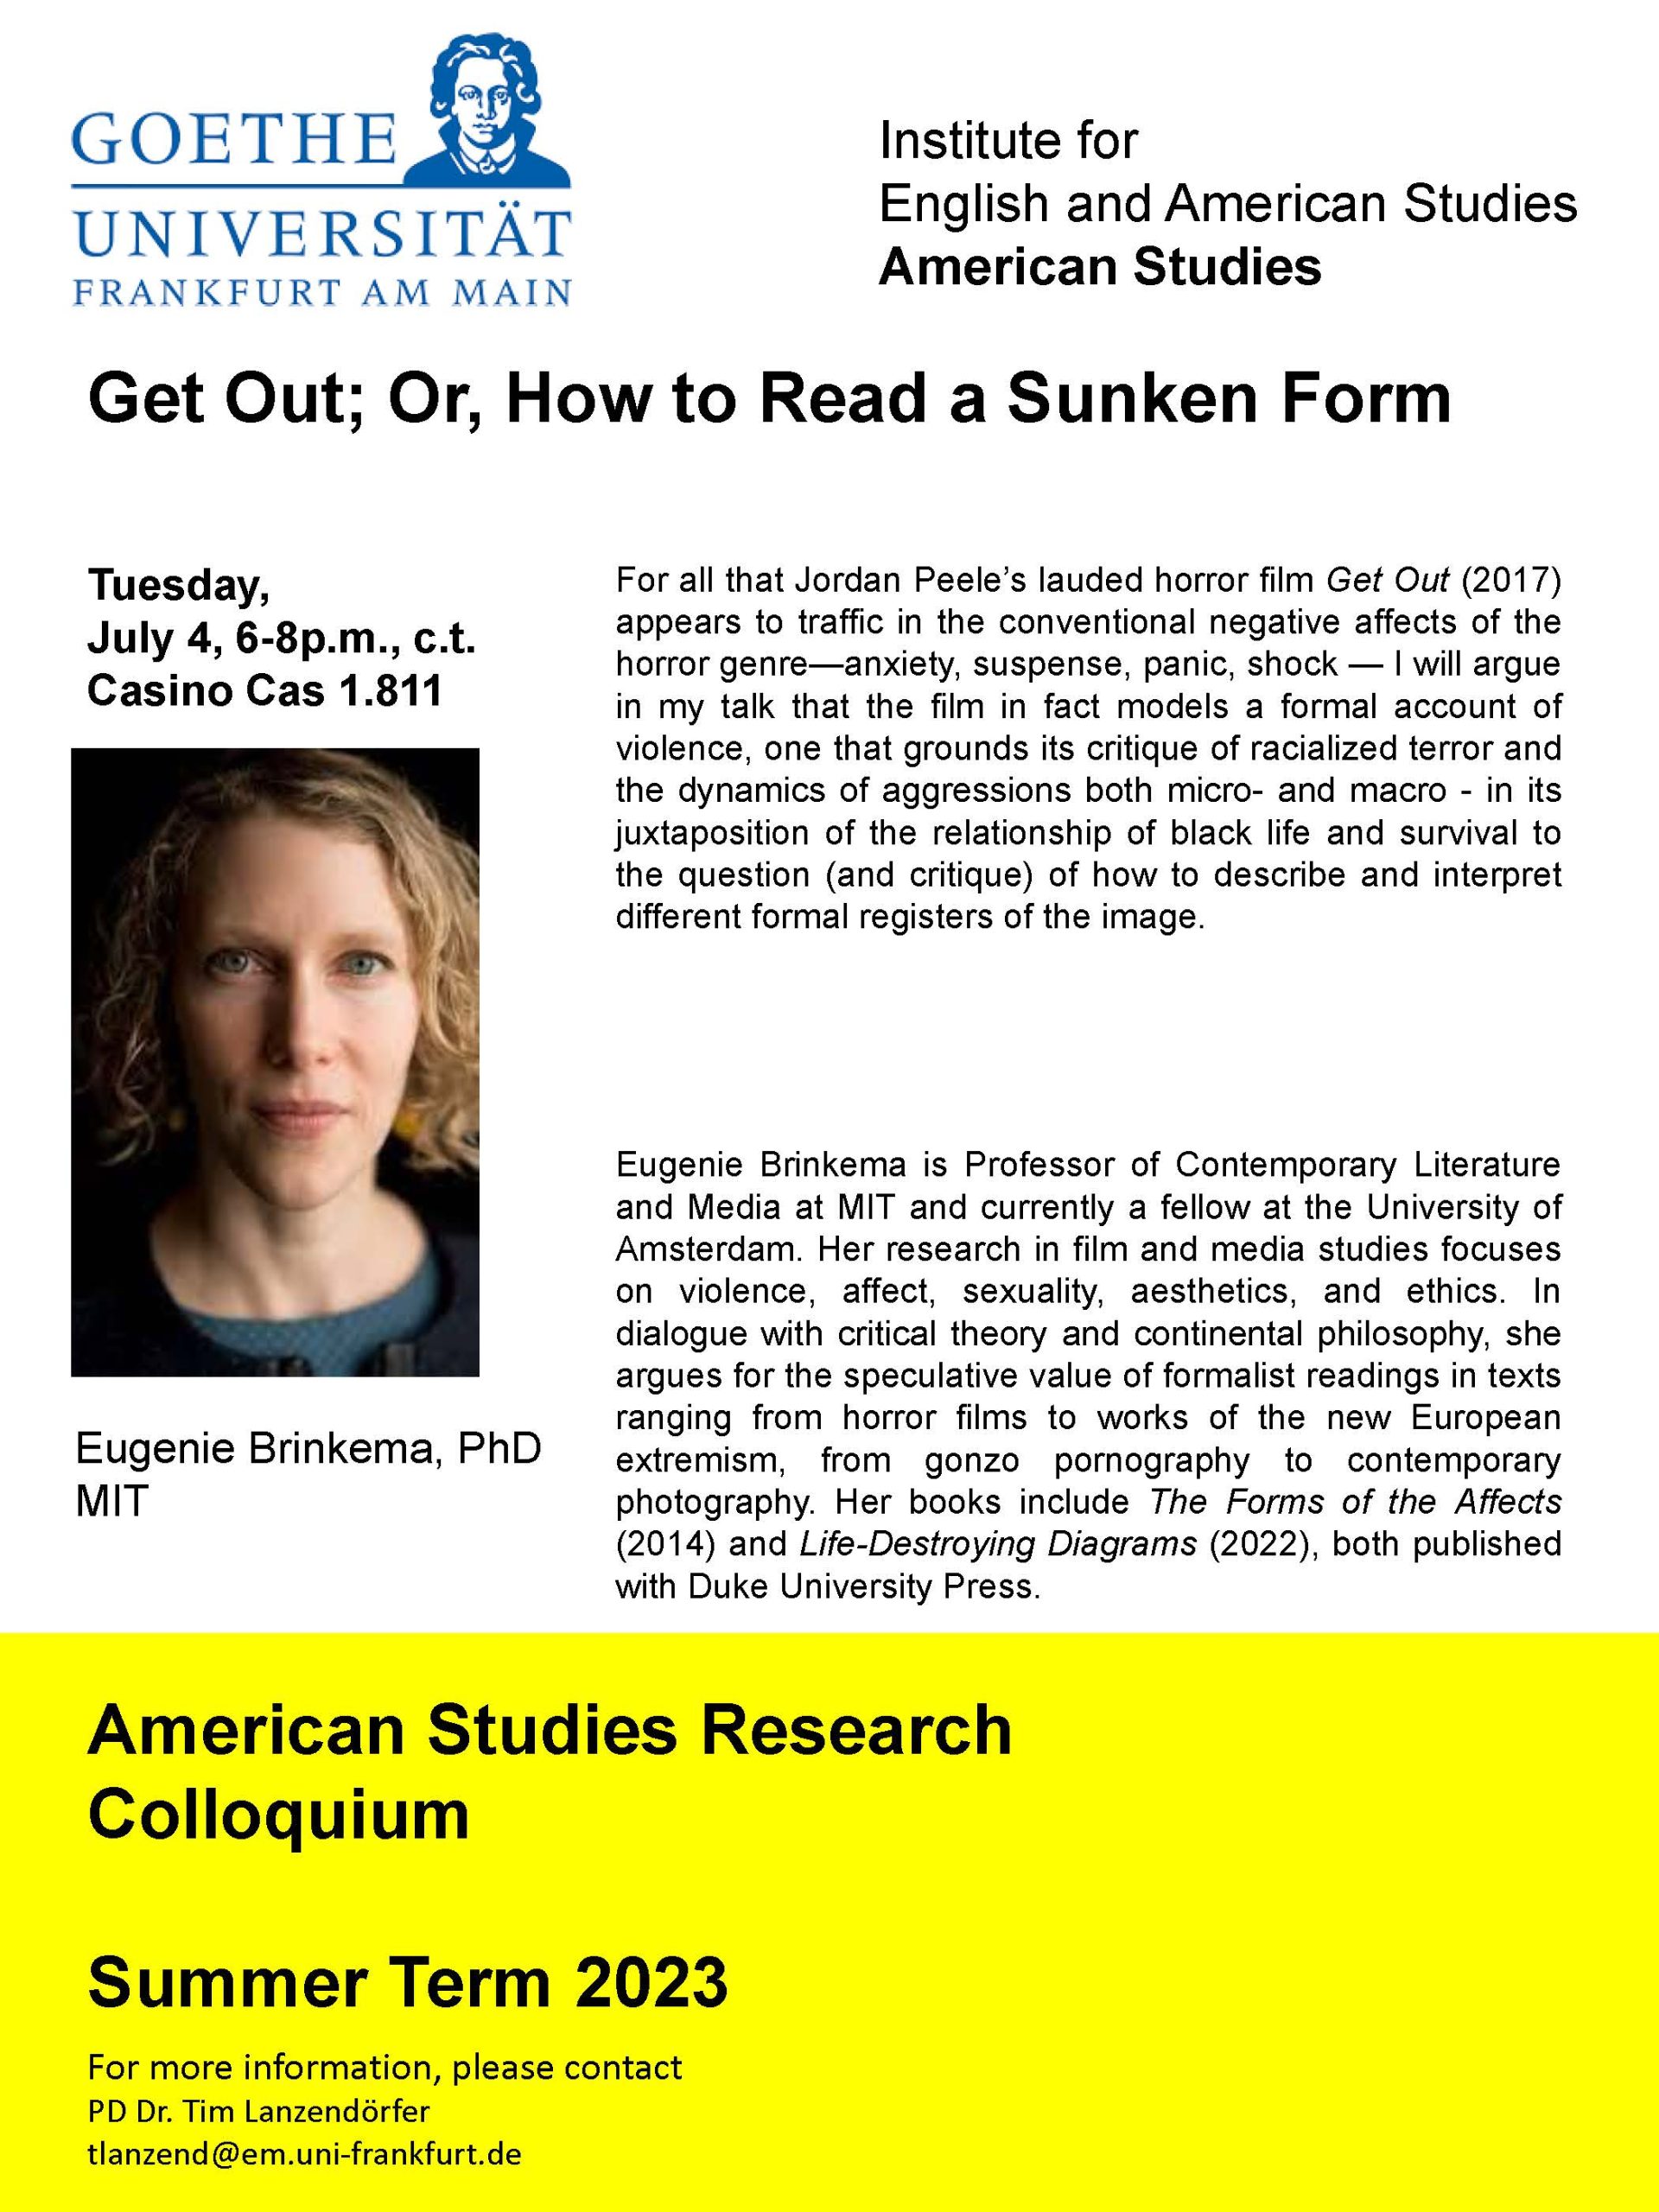 July 4th: Goethe-Universität presents, Prof Eugenie Brinkema “Get Out; Or, How to Read a Sunken Form”